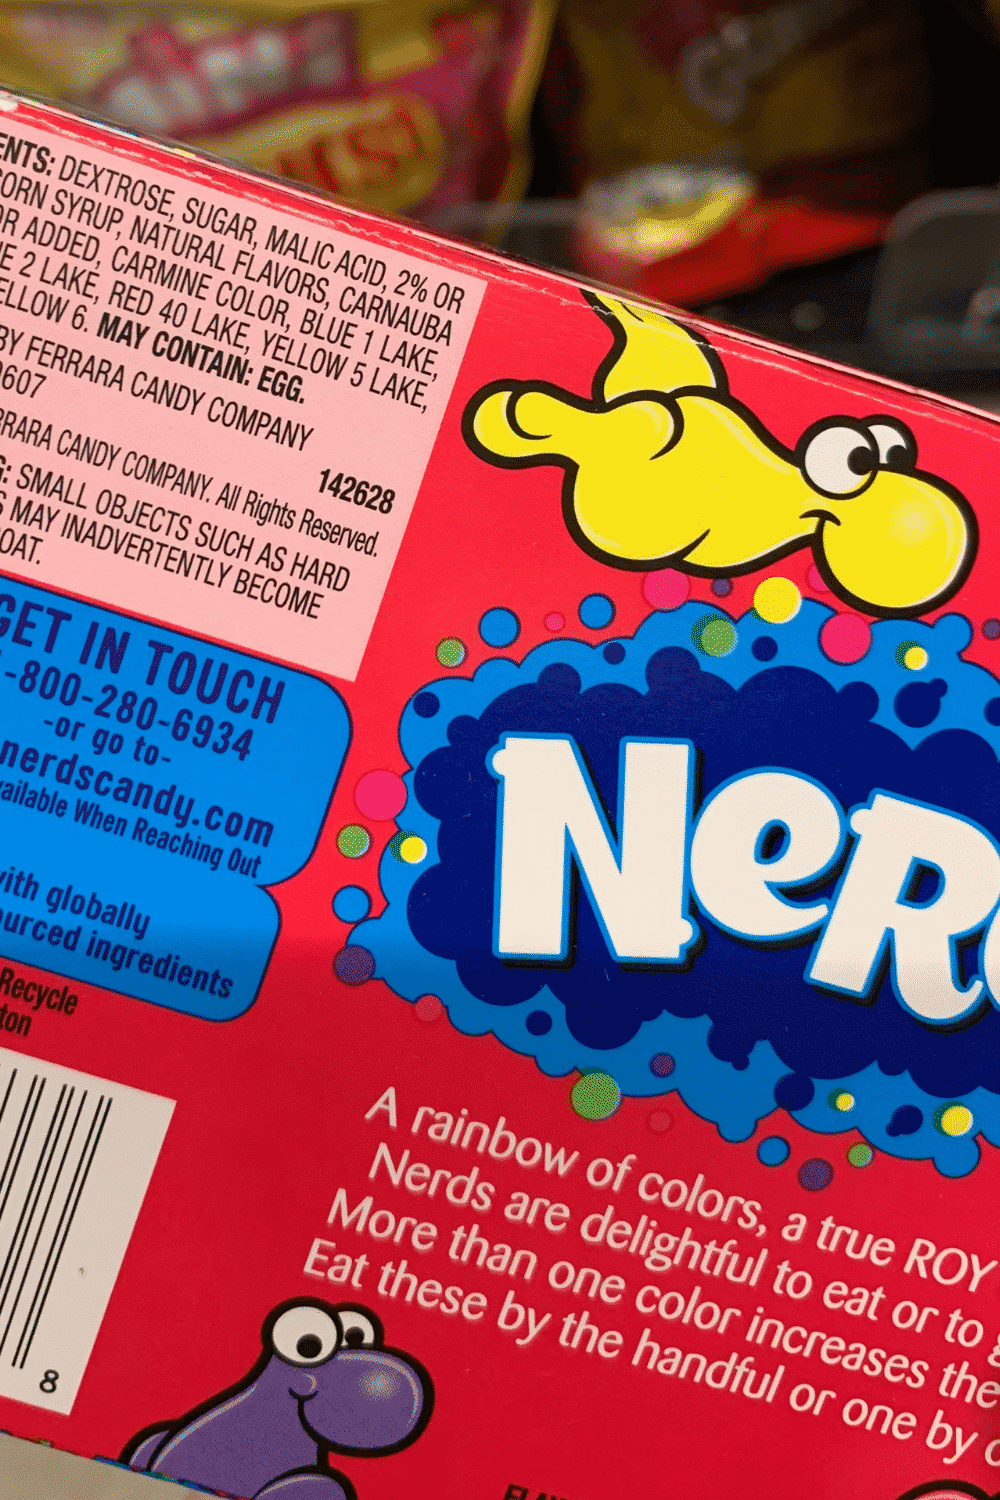 The back of a box of Nerds candy.